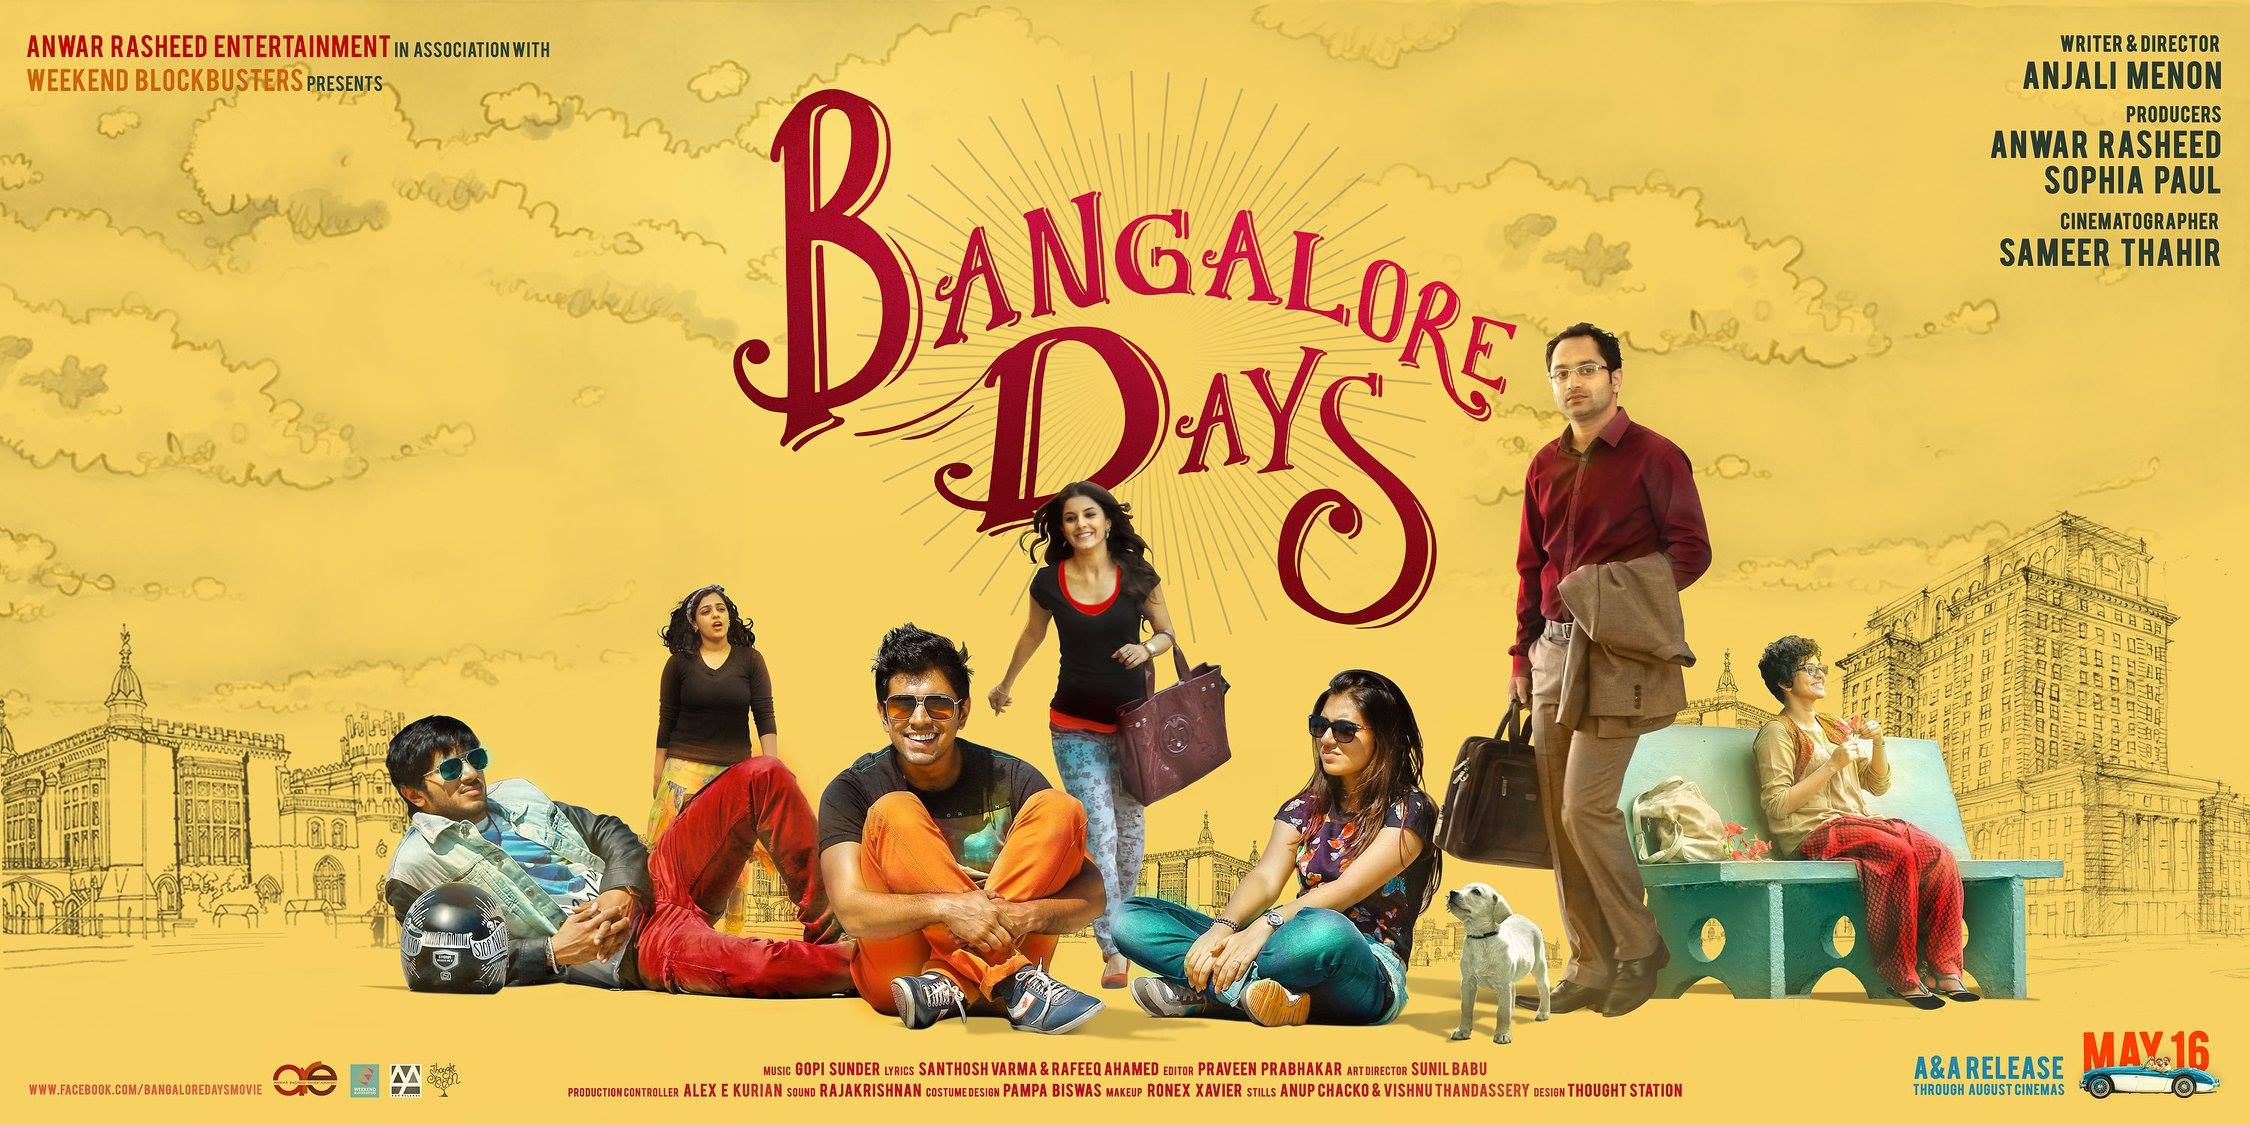 How Is Bangalore Portrayed In The Movie Bangalore Days